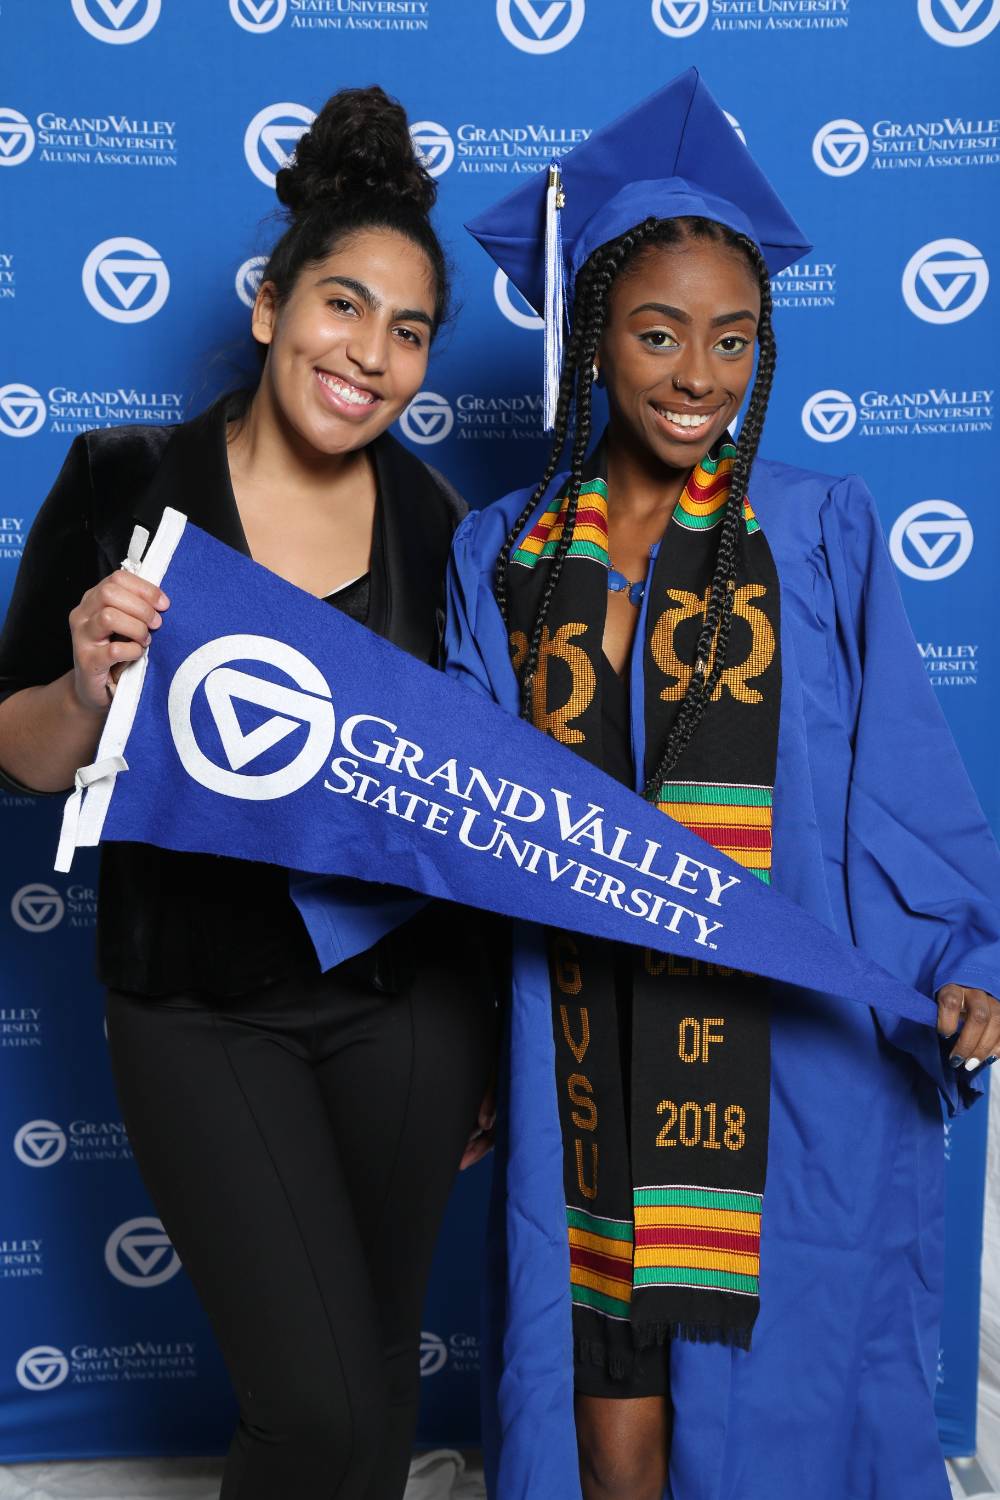 Two friends pose together at Gradfest